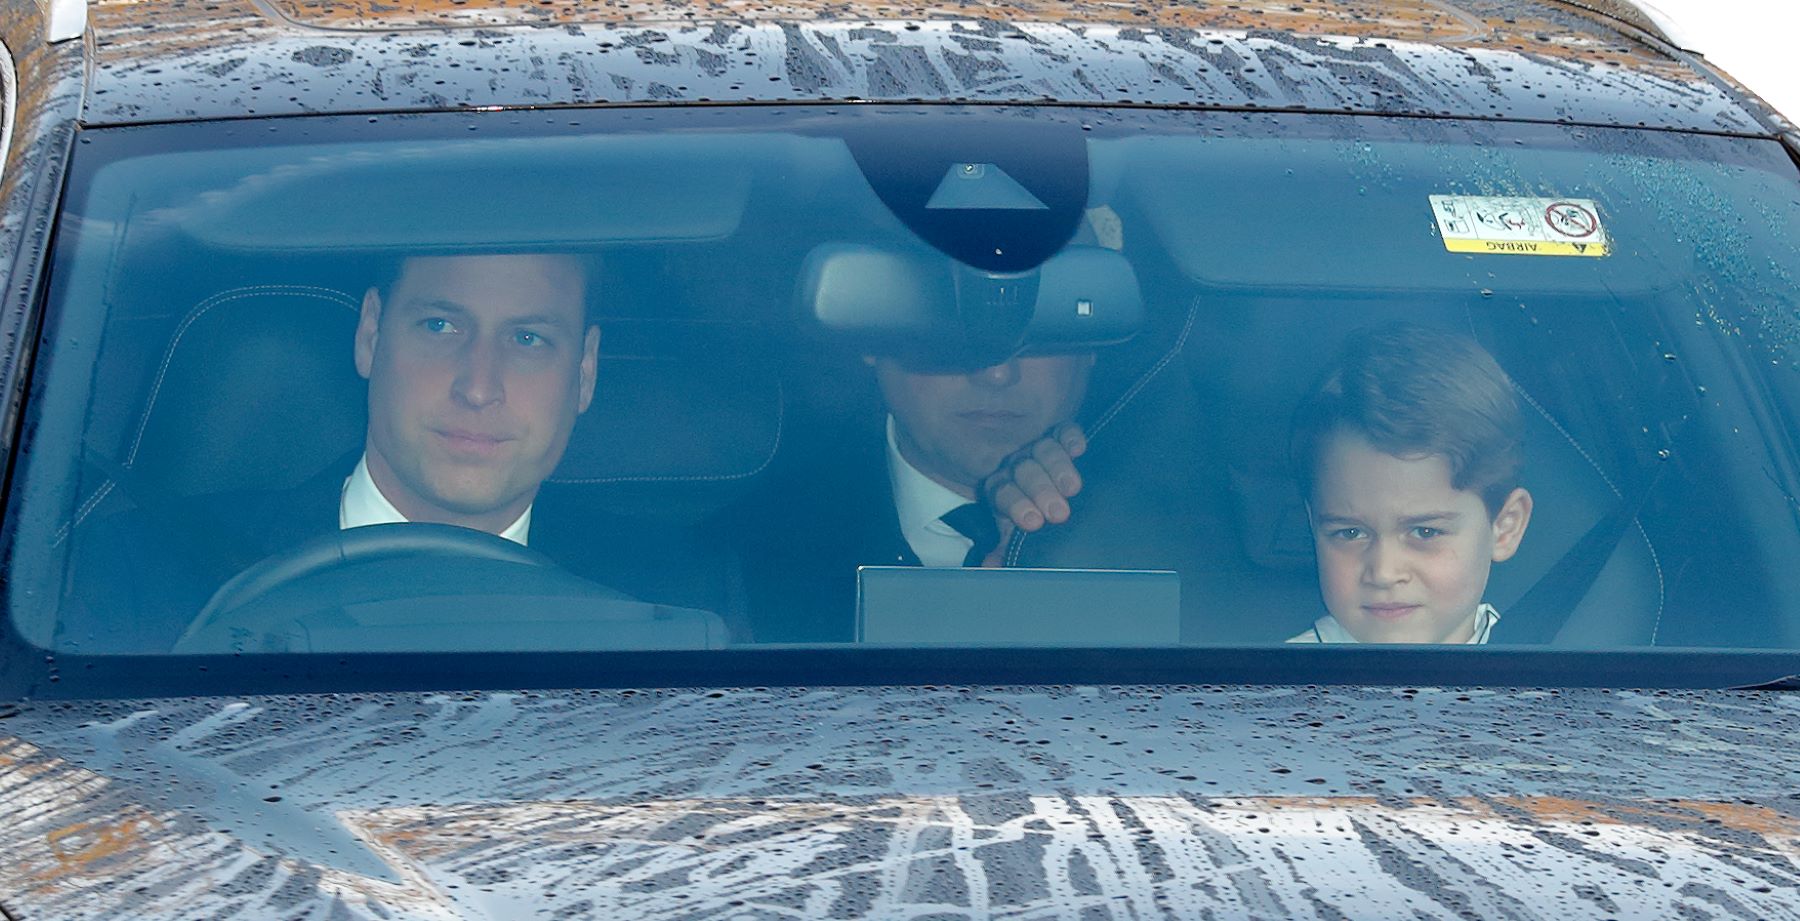 Prince William driving and Prince George in the passenger seat on the way to a Christmas lunch for royal family members in London, United Kingdom (U.K.)